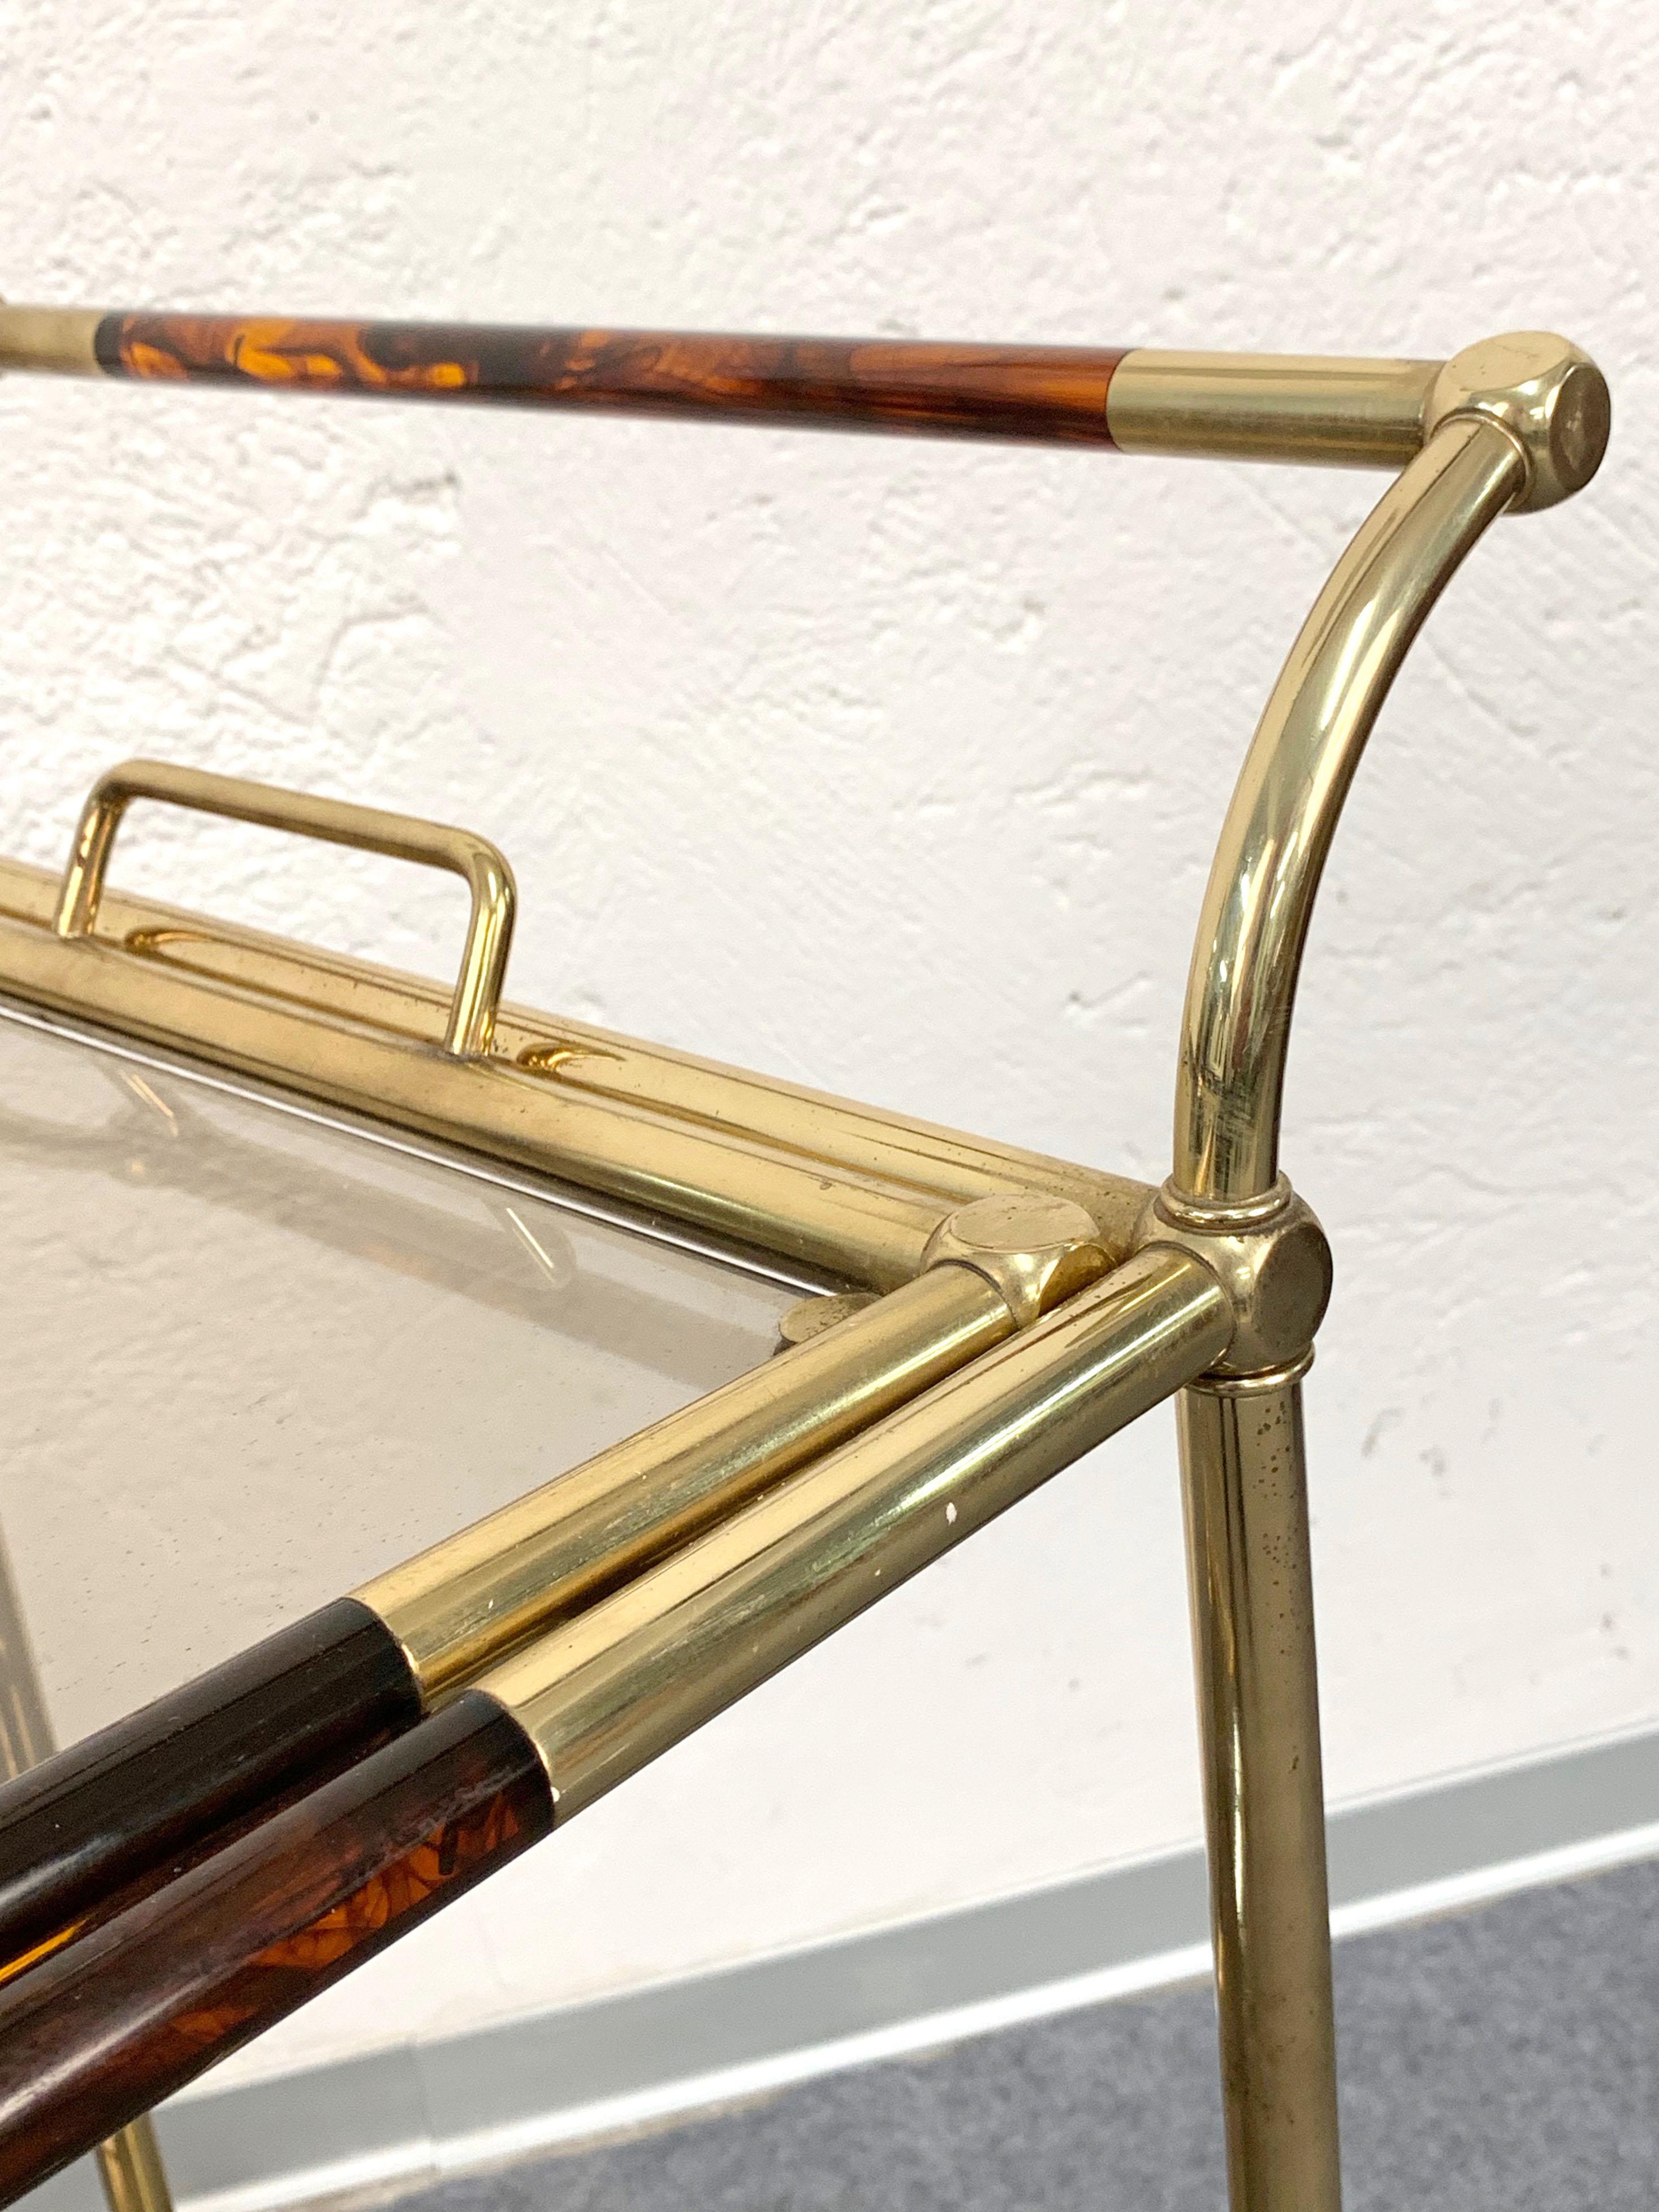 Elegant golden brass and tortoiseshell Lucite trolley. This item is attributed to Willy Rizzo and was produced in Italy during 1980s. 

This item is unique as it has the top becoming a wonderful service tray when needed. The bottom shelf has a